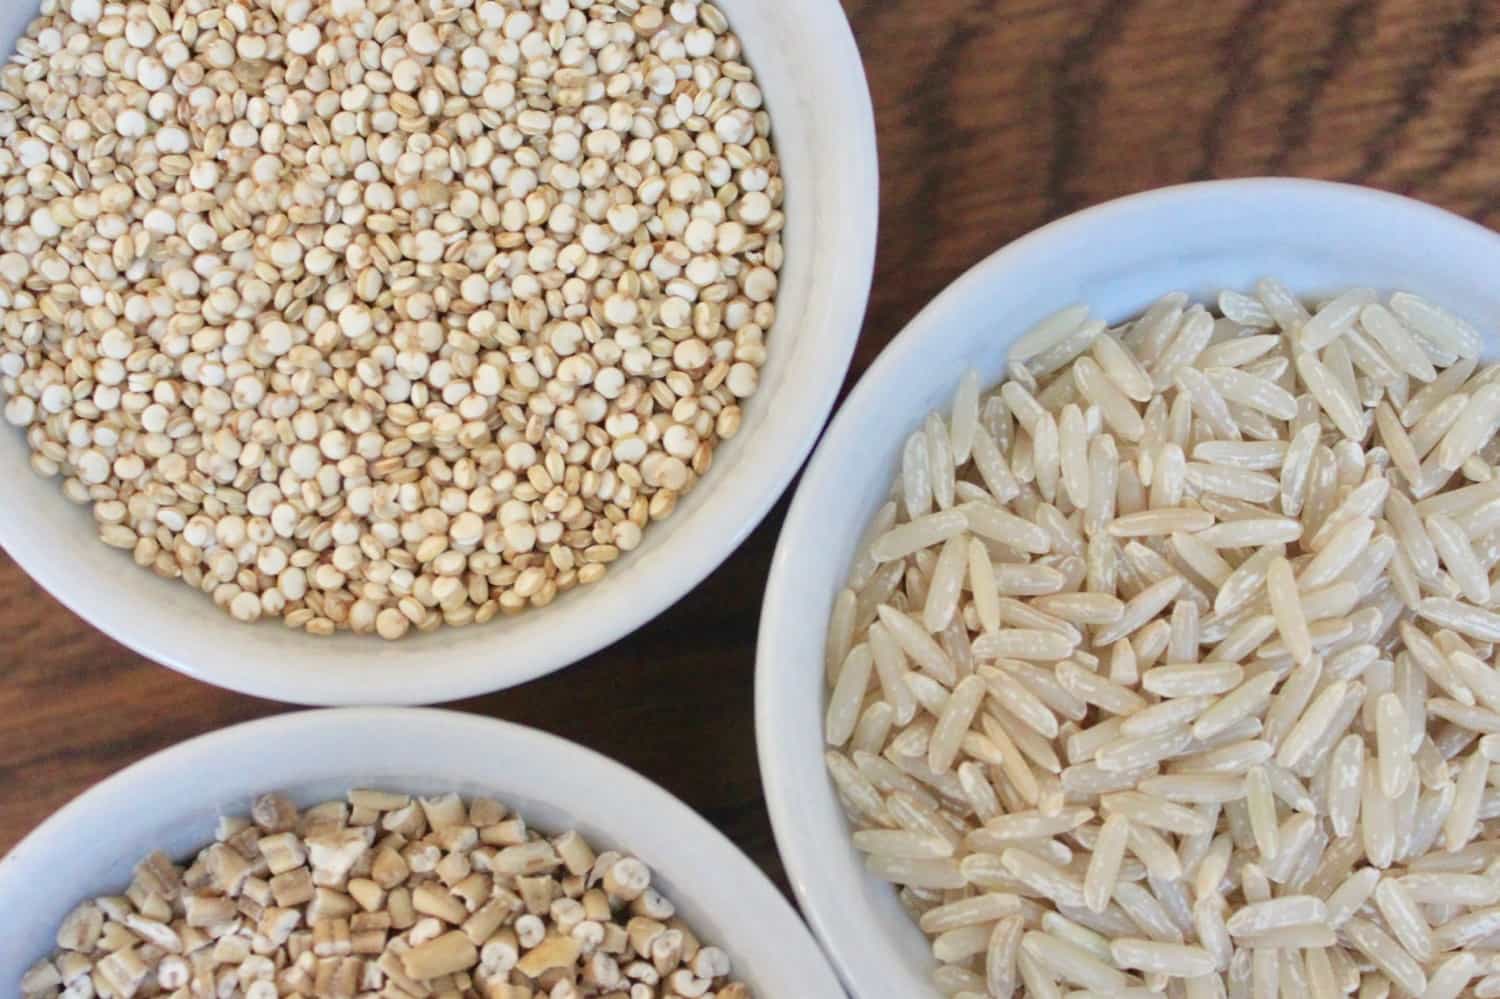 Why we should eat more whole grains